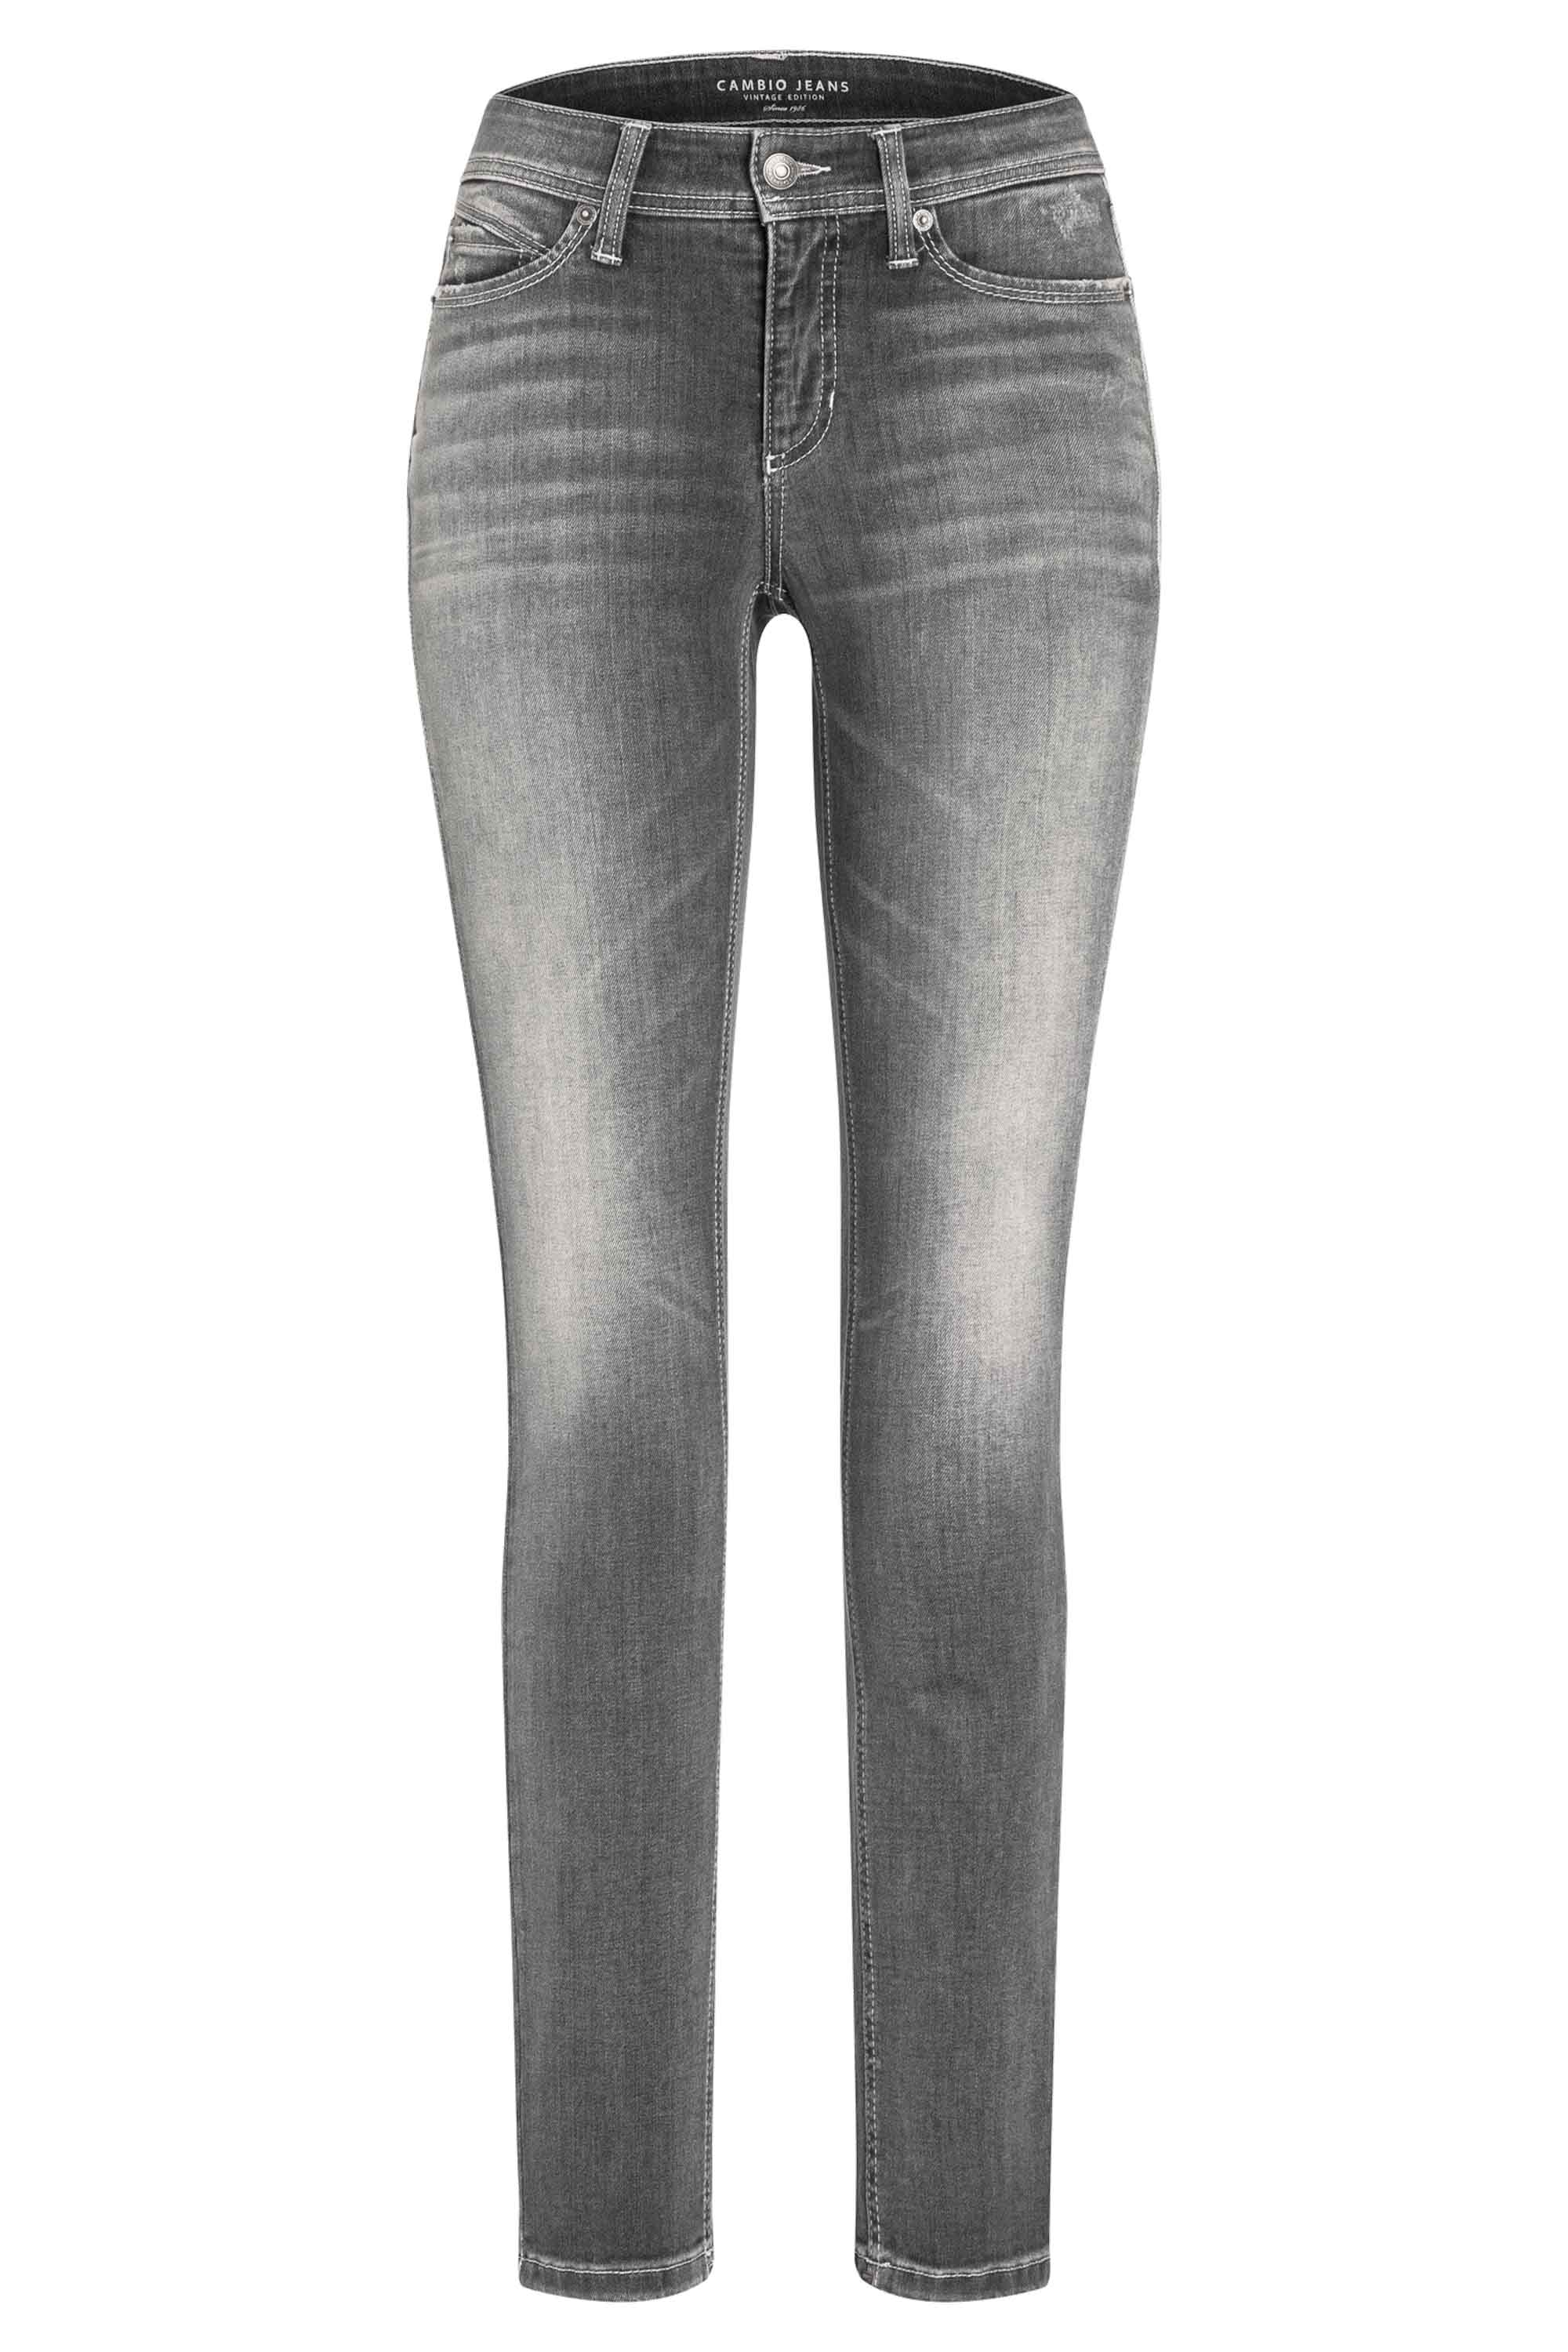 Cambio Trousers Parla Hr 9221 0015 21 Grey By Penninkhoffashion Com